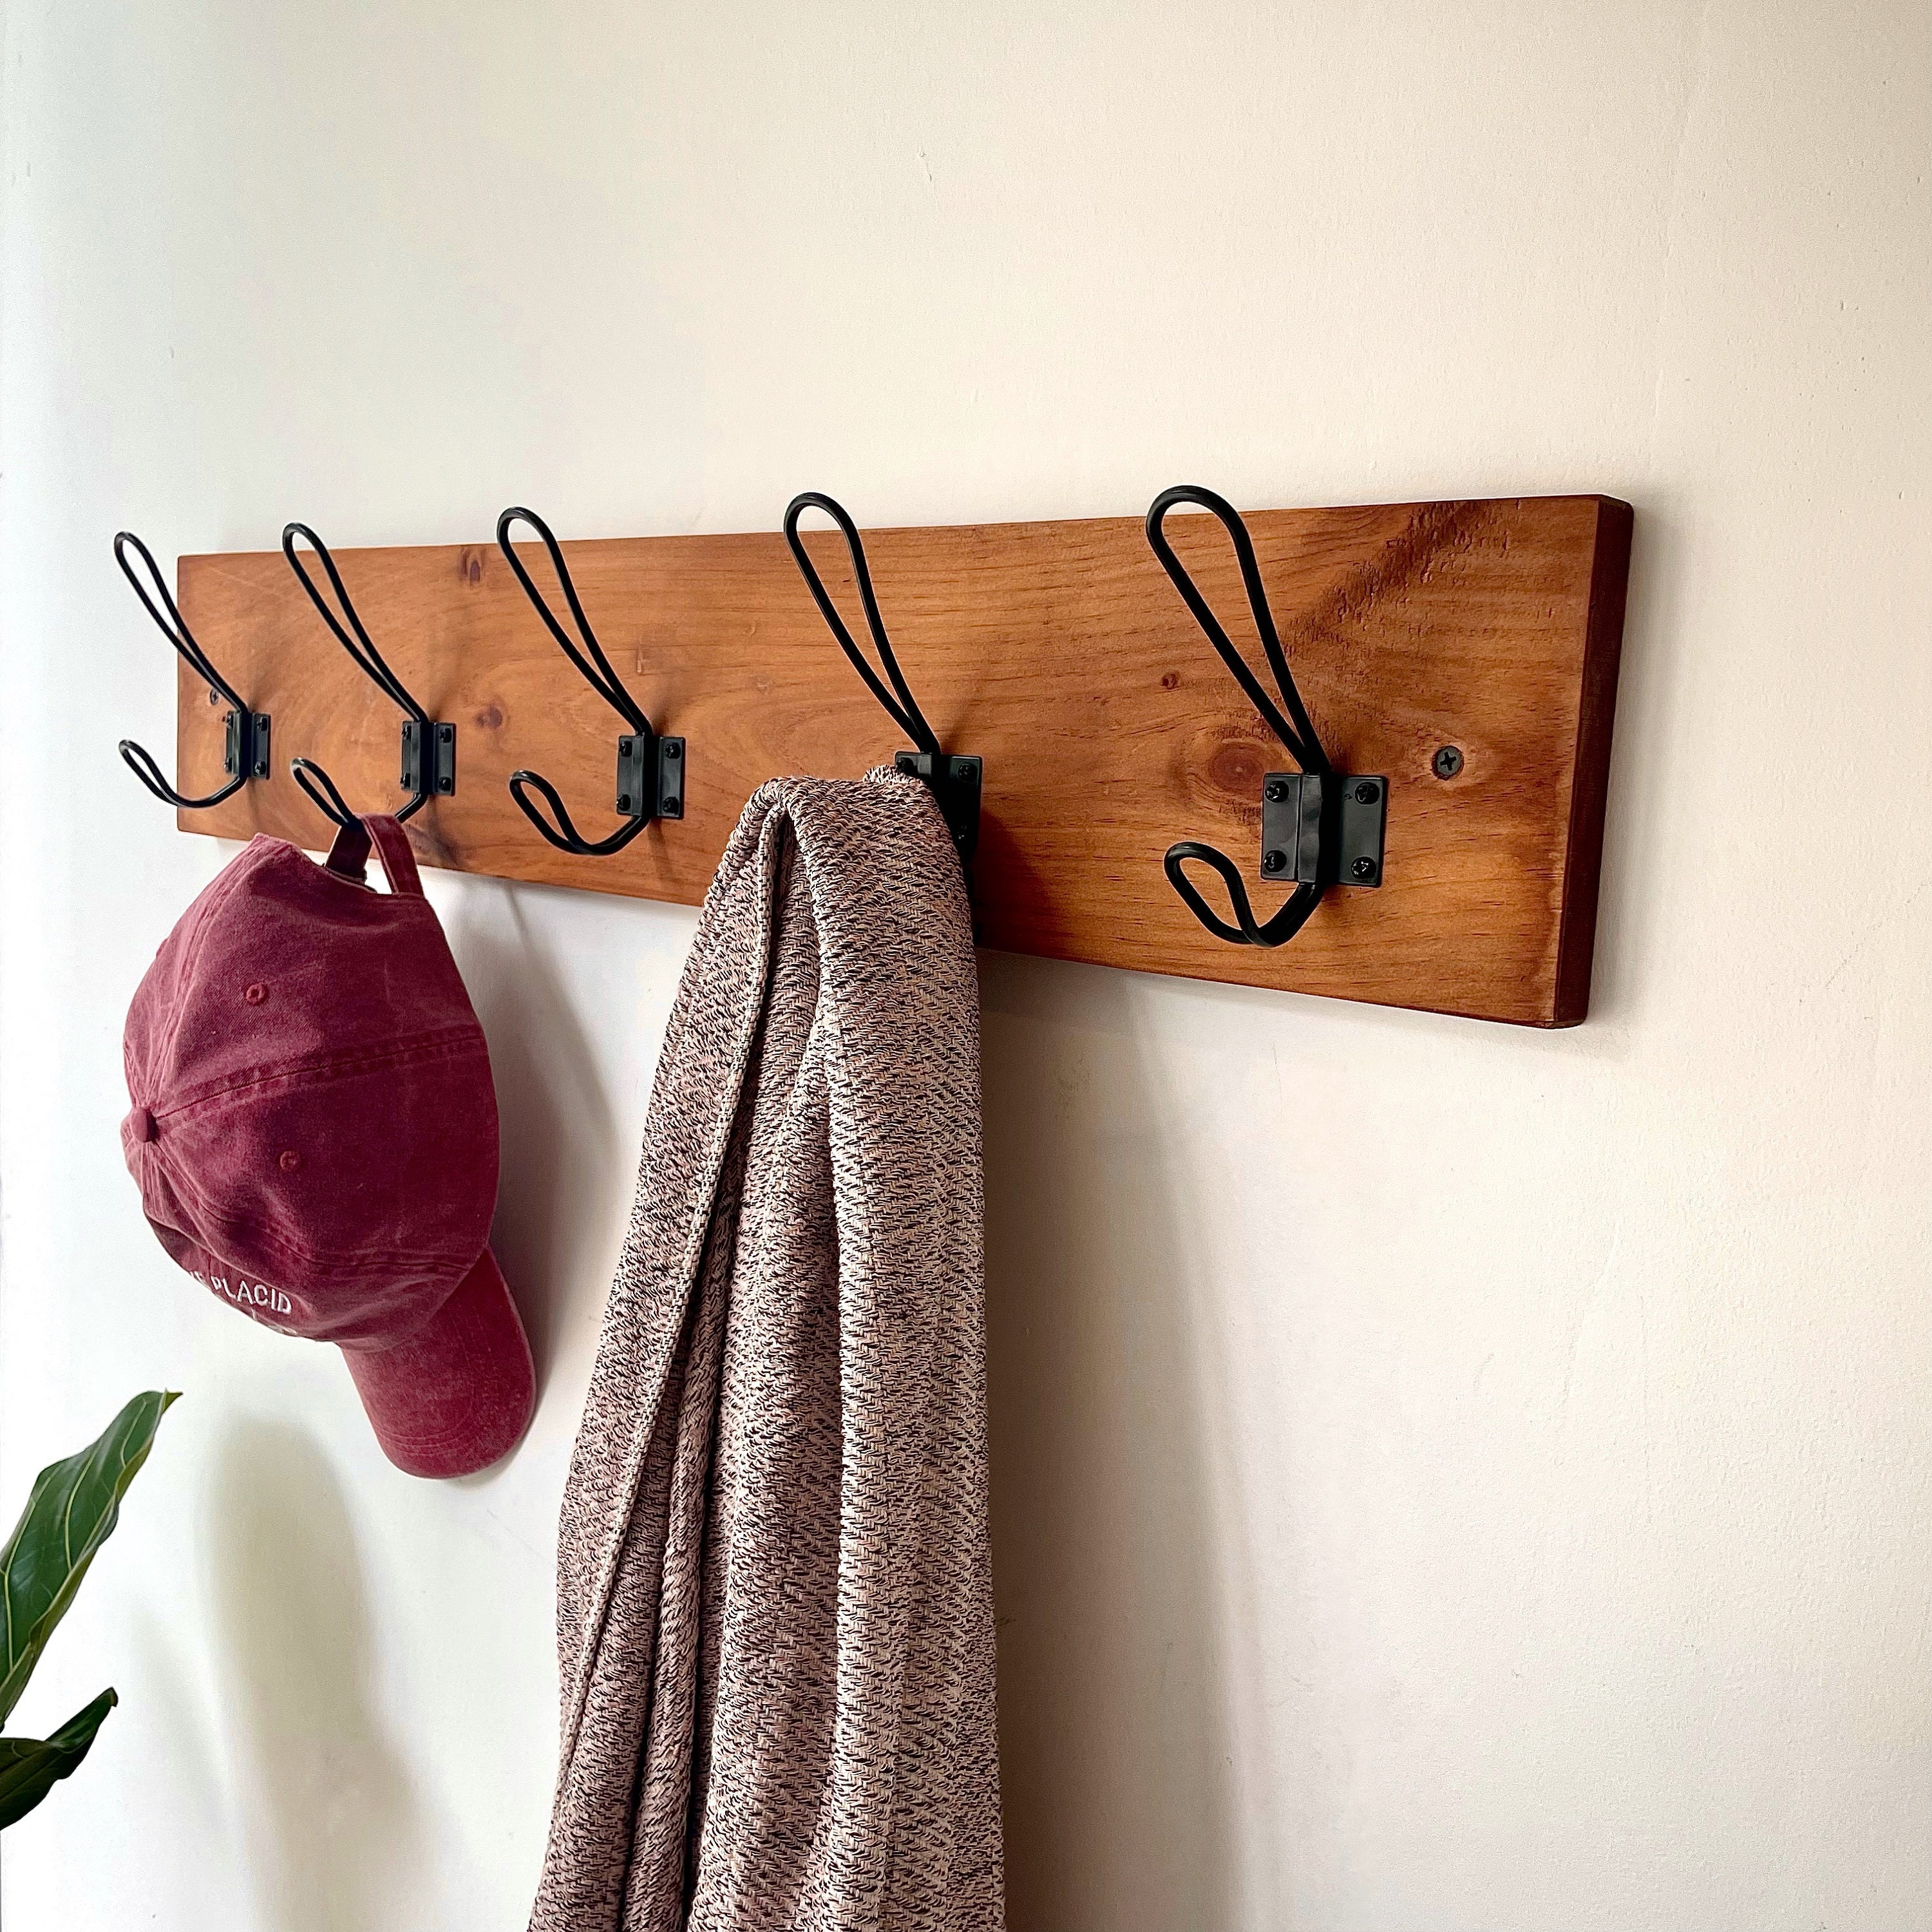  Wildflower Floral Pattern Hooks Wall Mounted, Self Adhesive  Towel Key Hook up, Coat and Hat Hook Rack, 7 Inches Durable Hooks : Home &  Kitchen